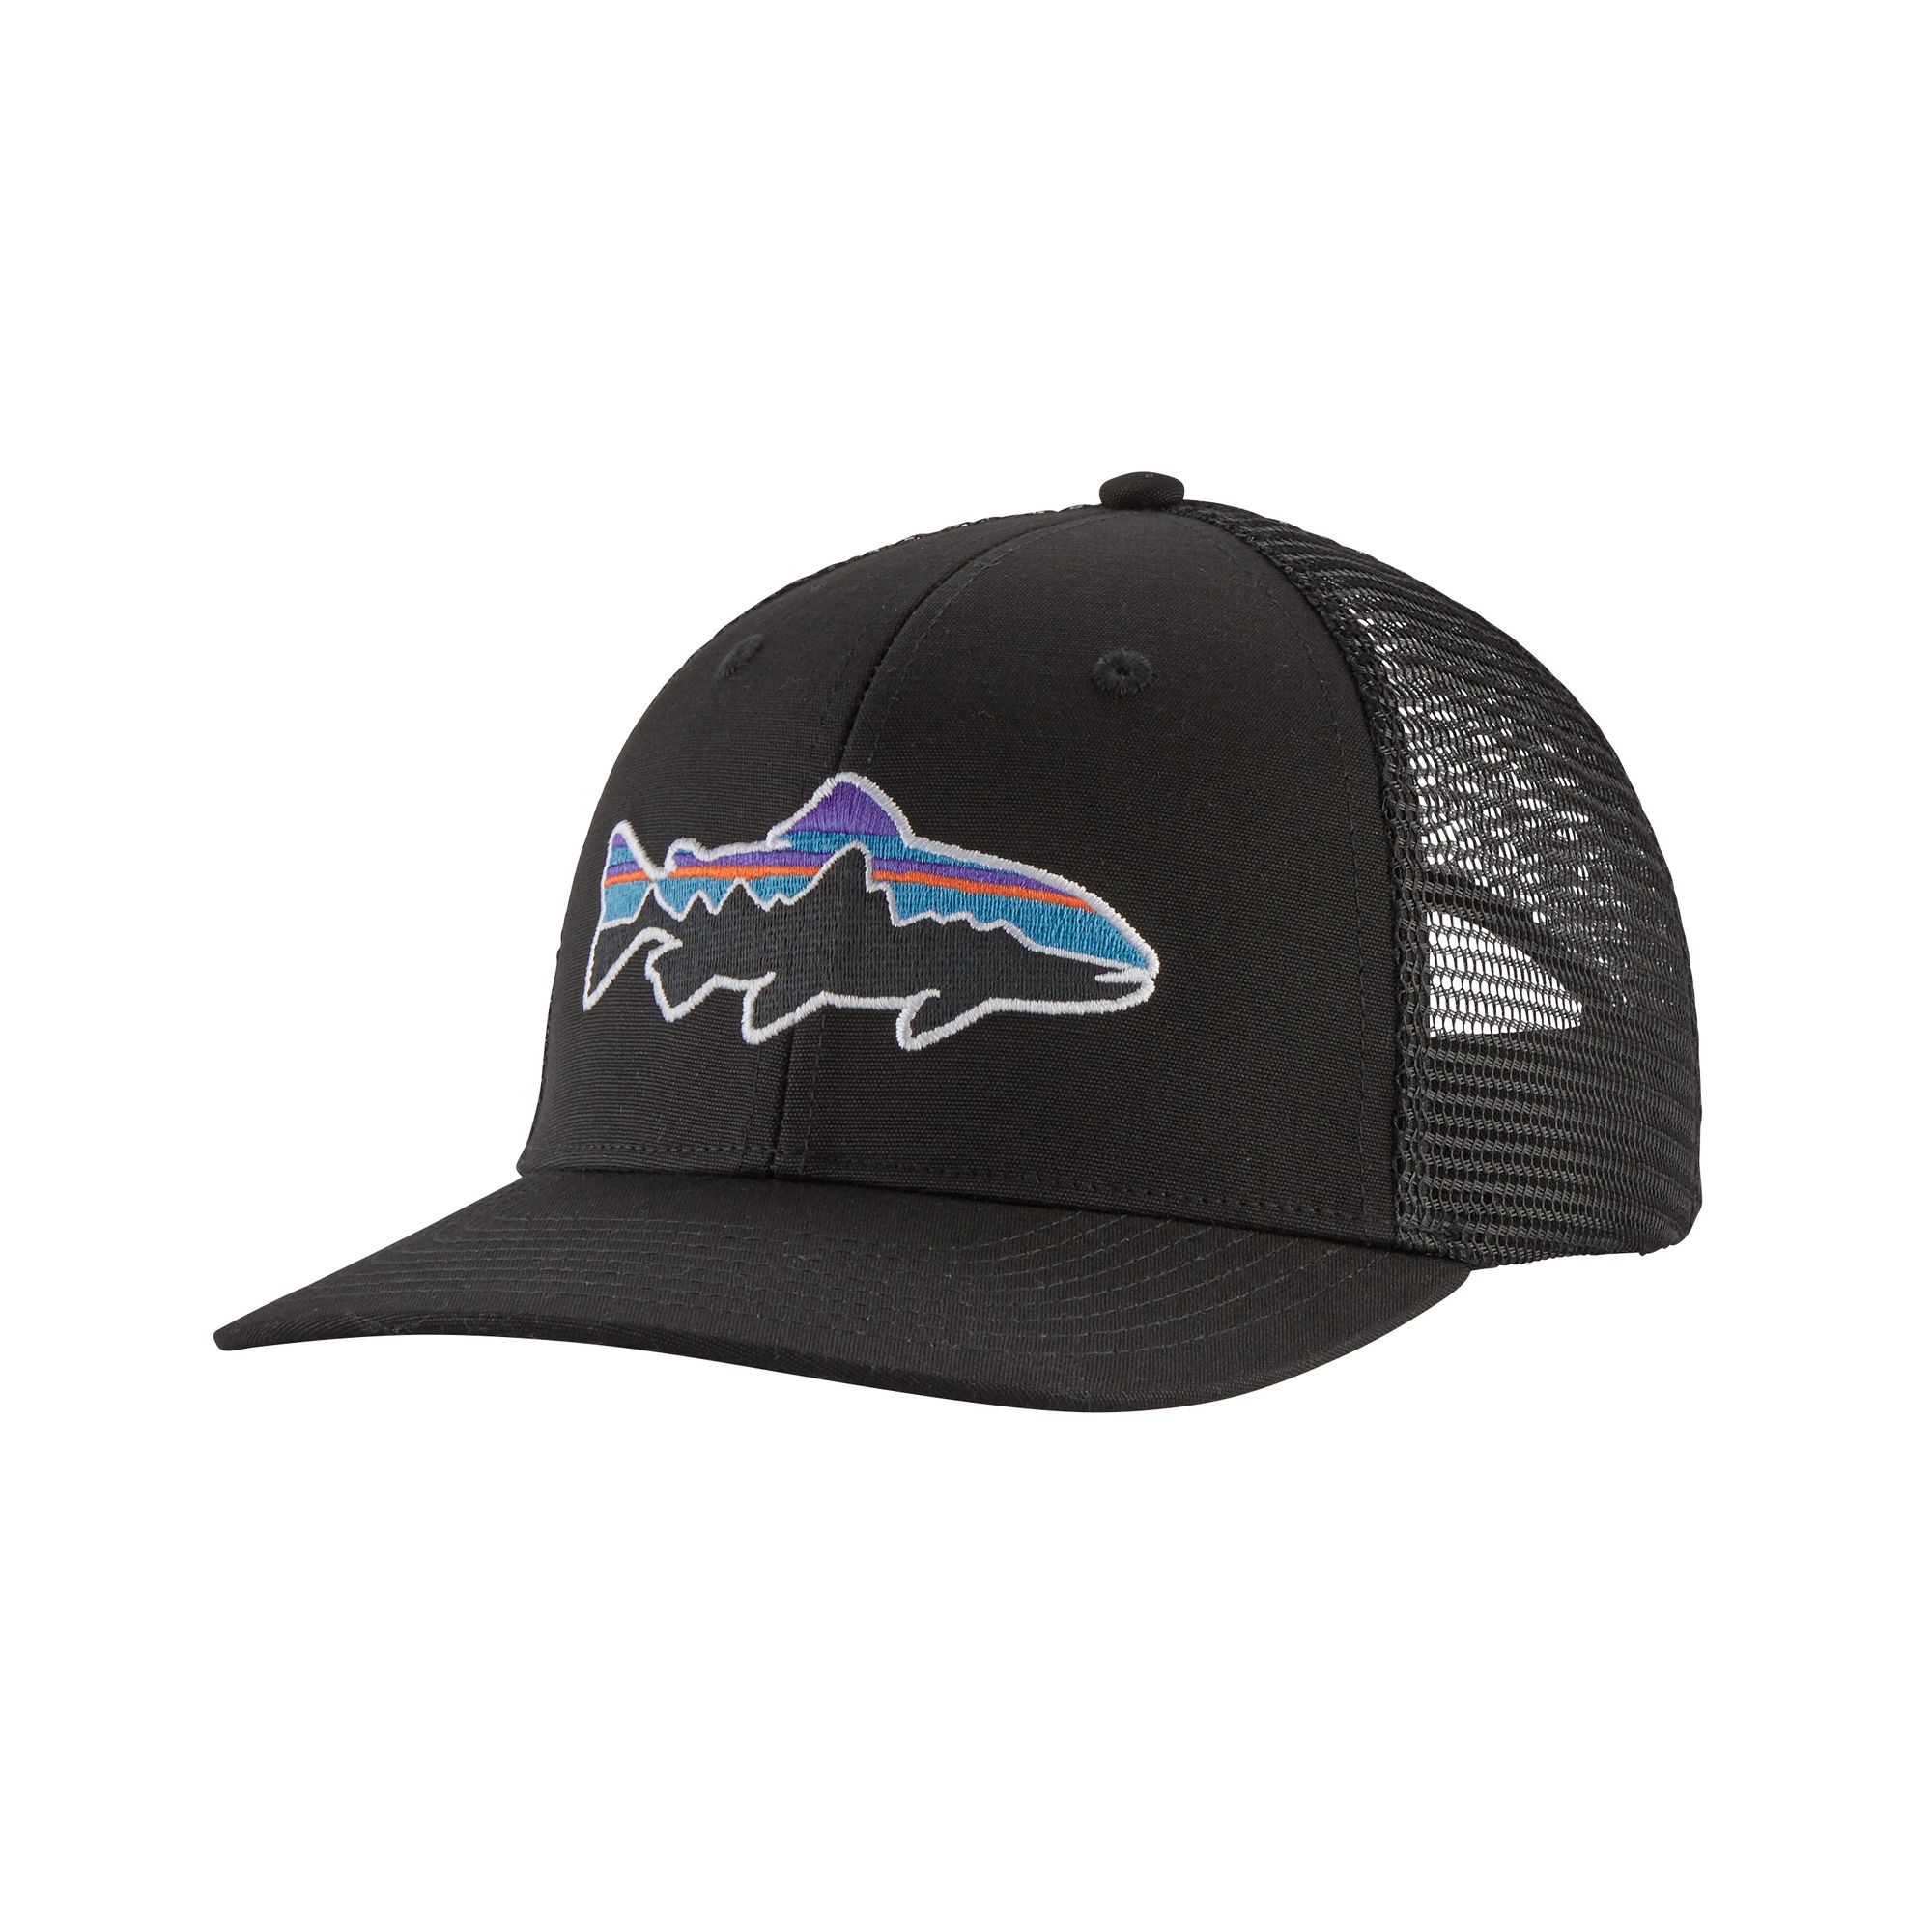 Patagonia Fitz Roy Trout Trucker Hat - Fin & Game